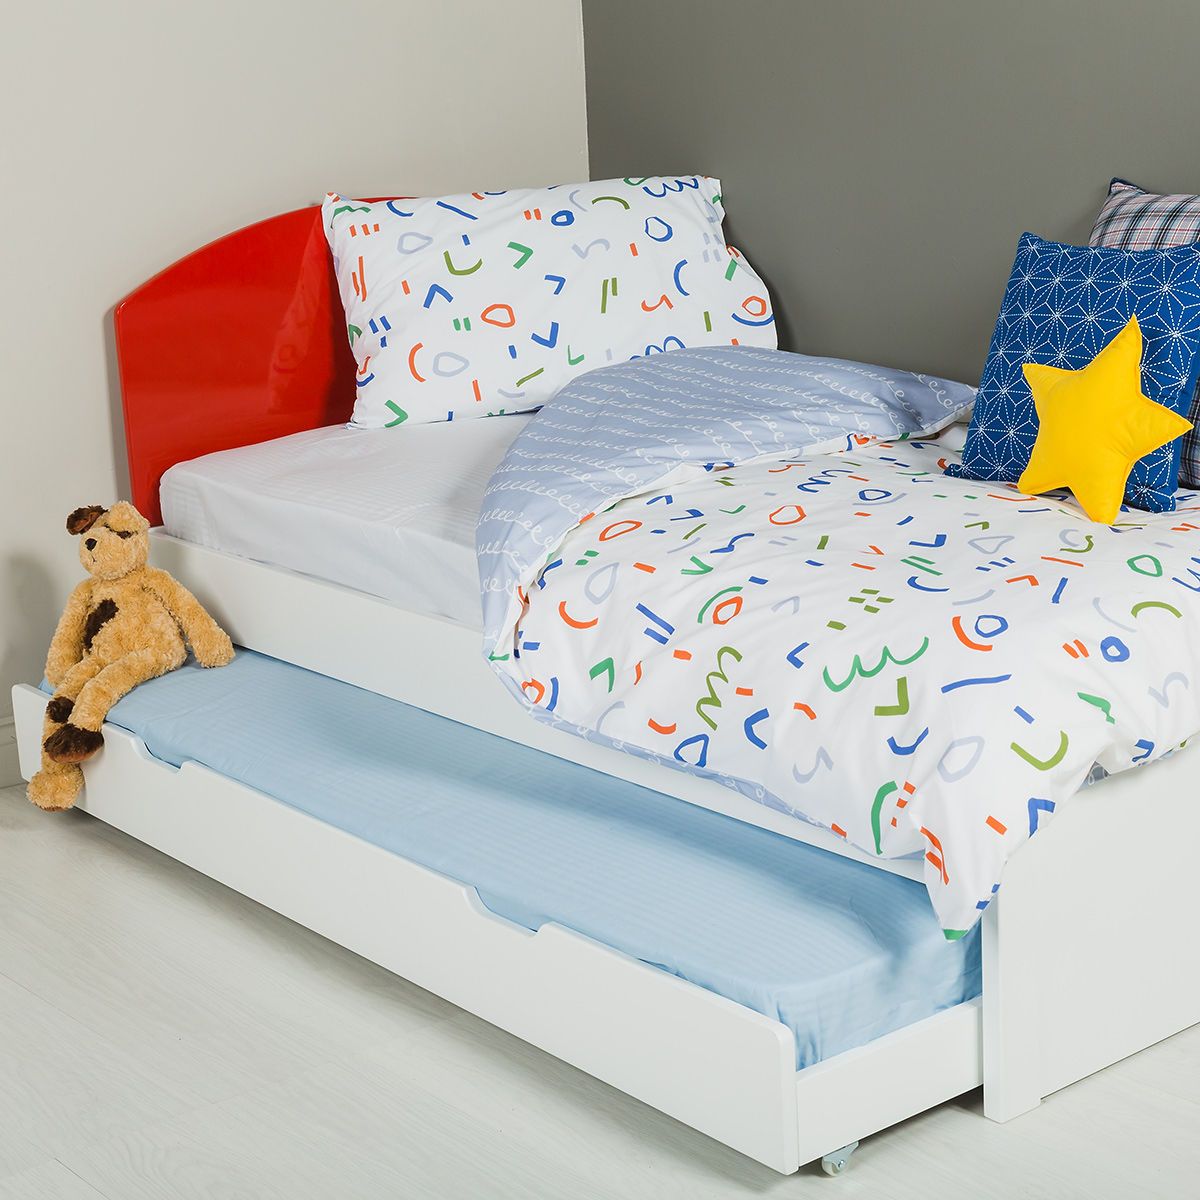 The Colourful Children's Single Bed - Red